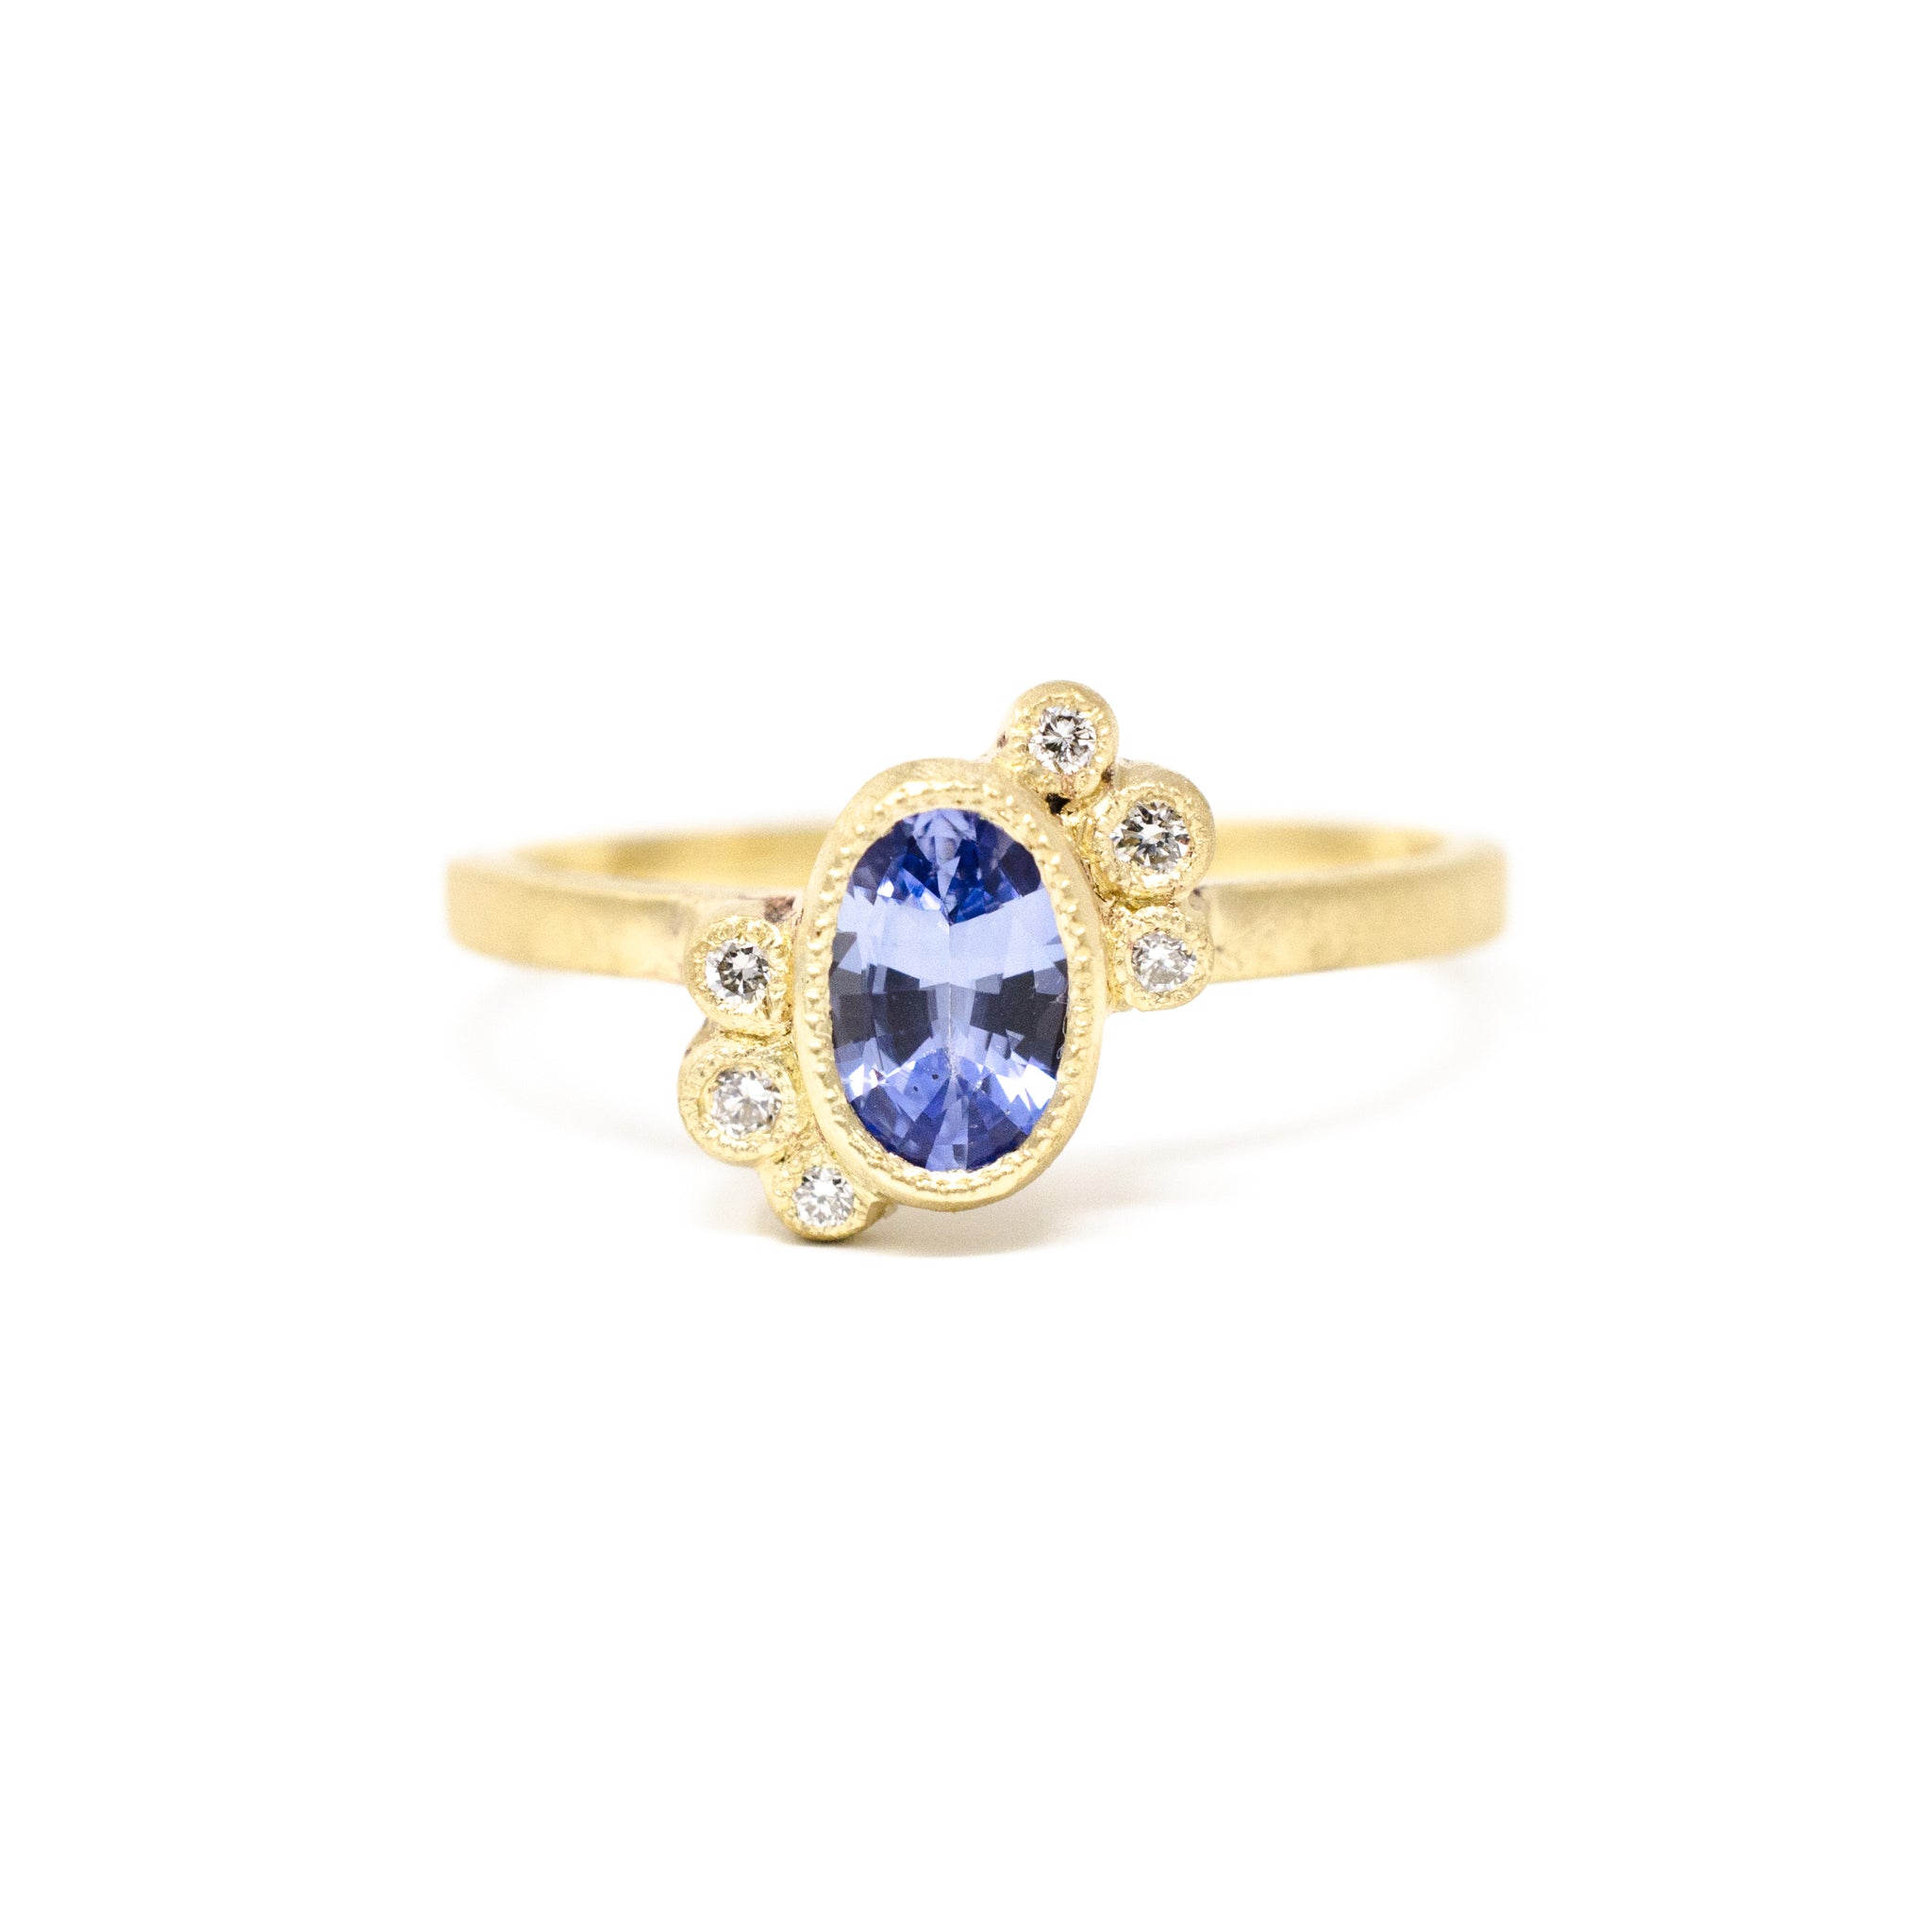 Majestic 22K Gold 7.5CT Blue Sapphire Ring – Andaaz Jewelers